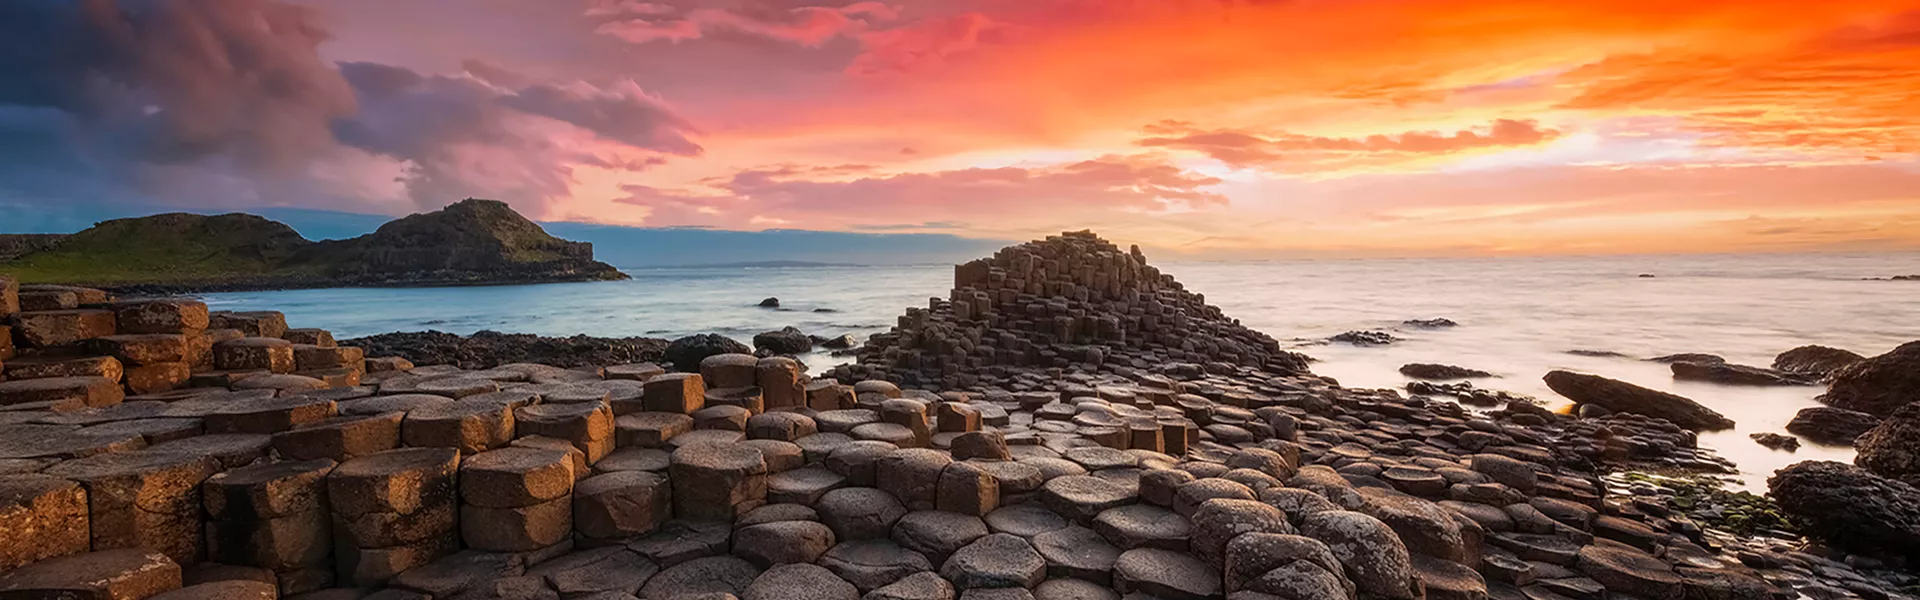 Custom Luxury Vacations in Northern Ireland - Giant's Causeway in County Antrim 